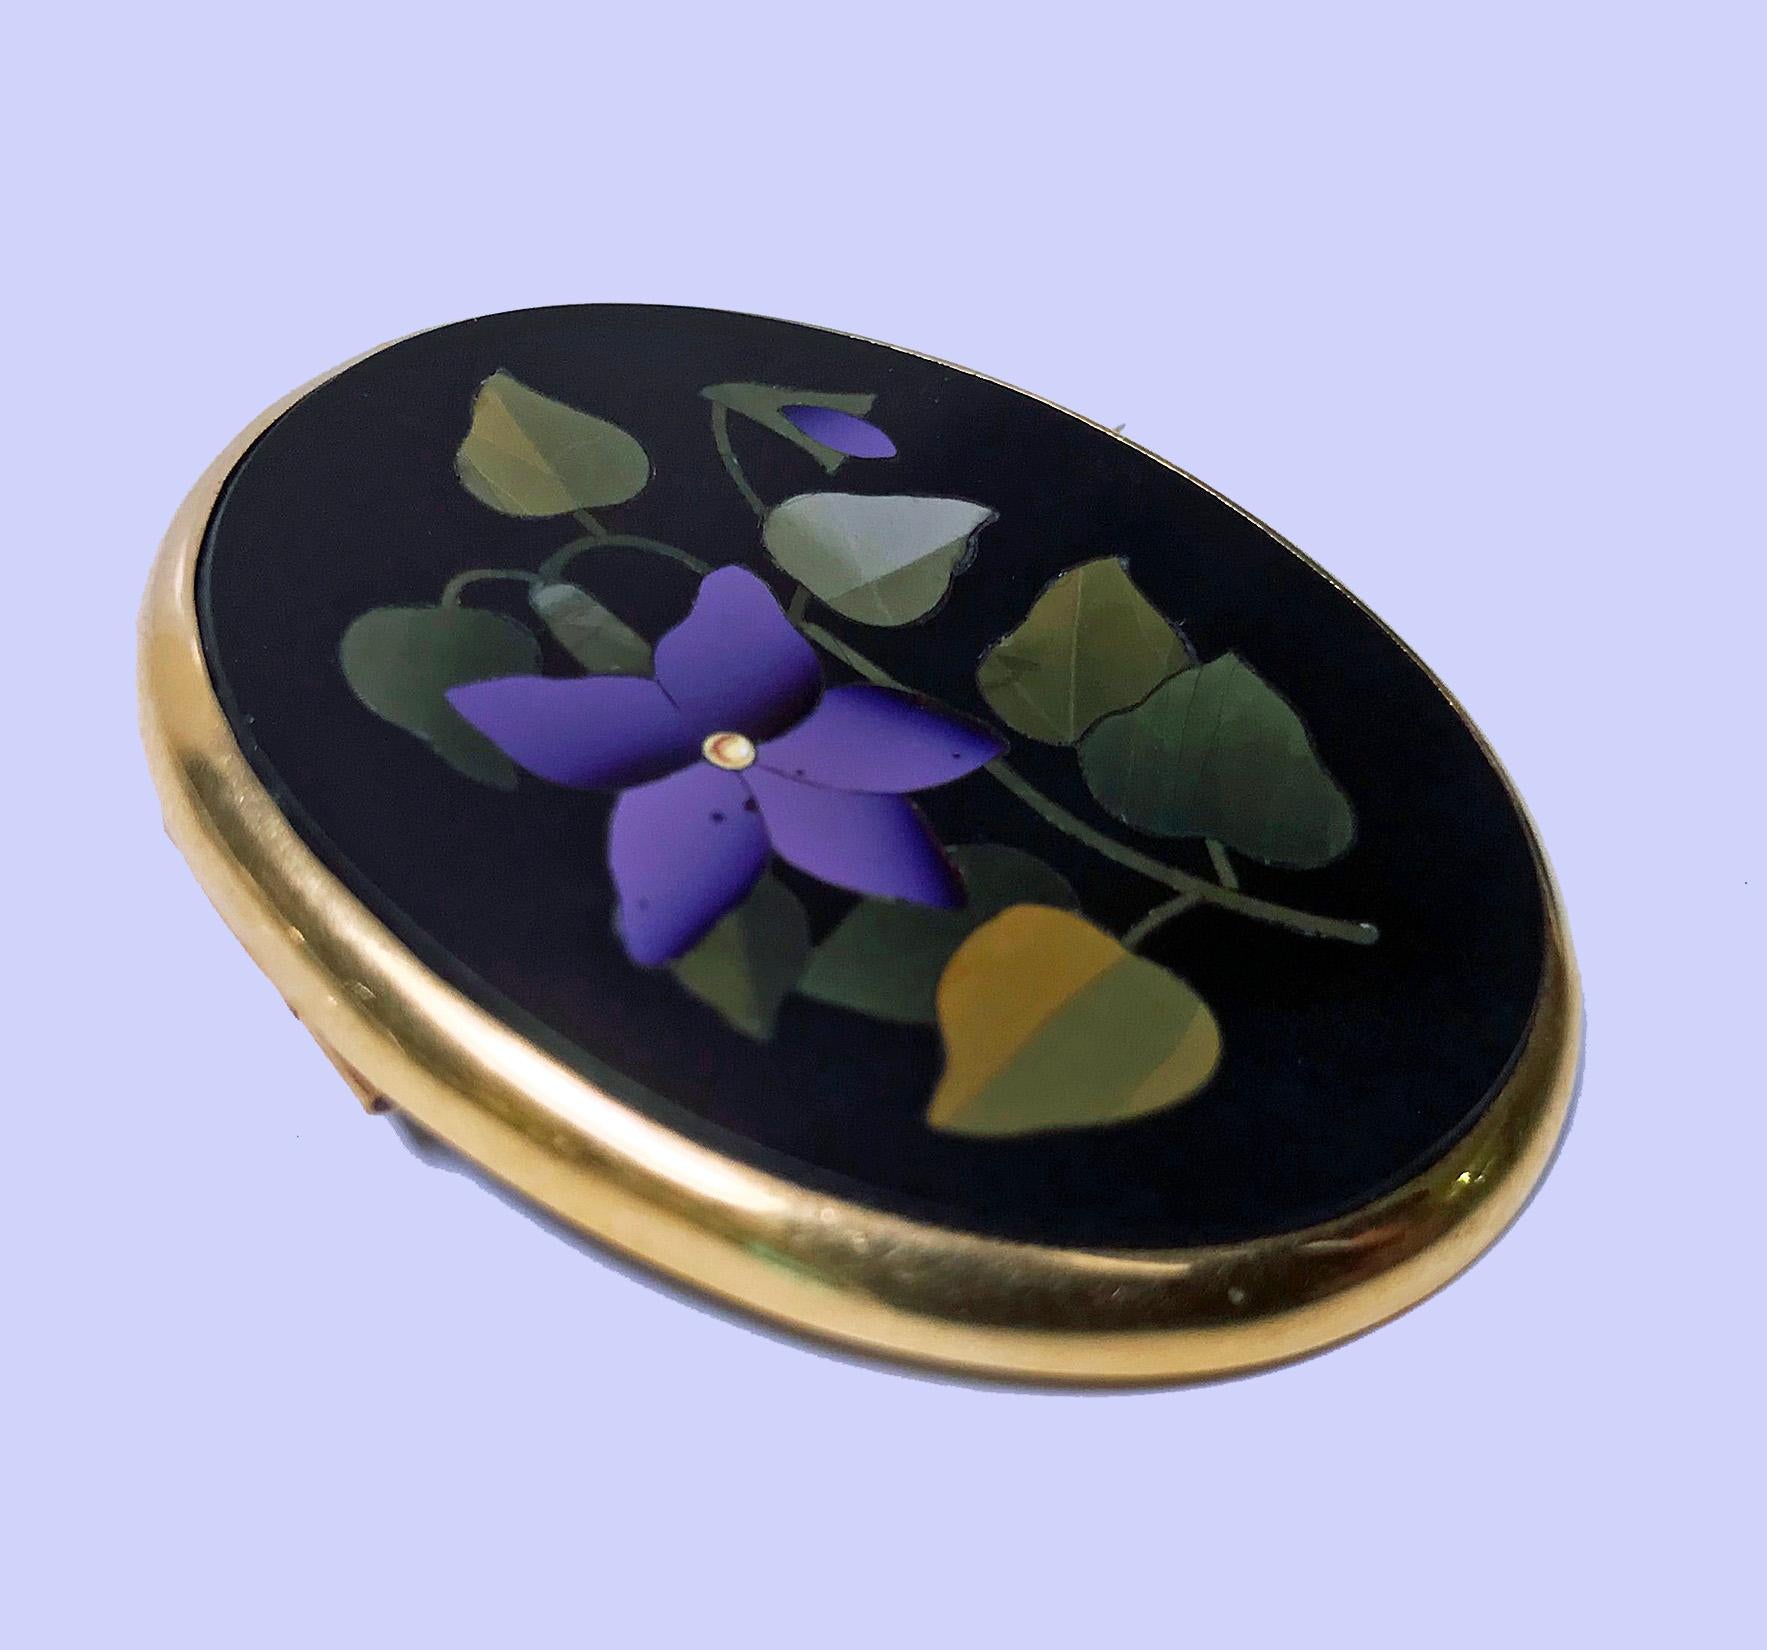 Antique 18K Gold Pietra Dura Brooch, Italy C.1875. Oval shape, fine pietra dura floral  green, lilac inlay colors, 18K surround gold mount. Gold acid tests 18K. Measures: 1.75 x 1.50 inches. Total Item Weight: 13.36 grams.